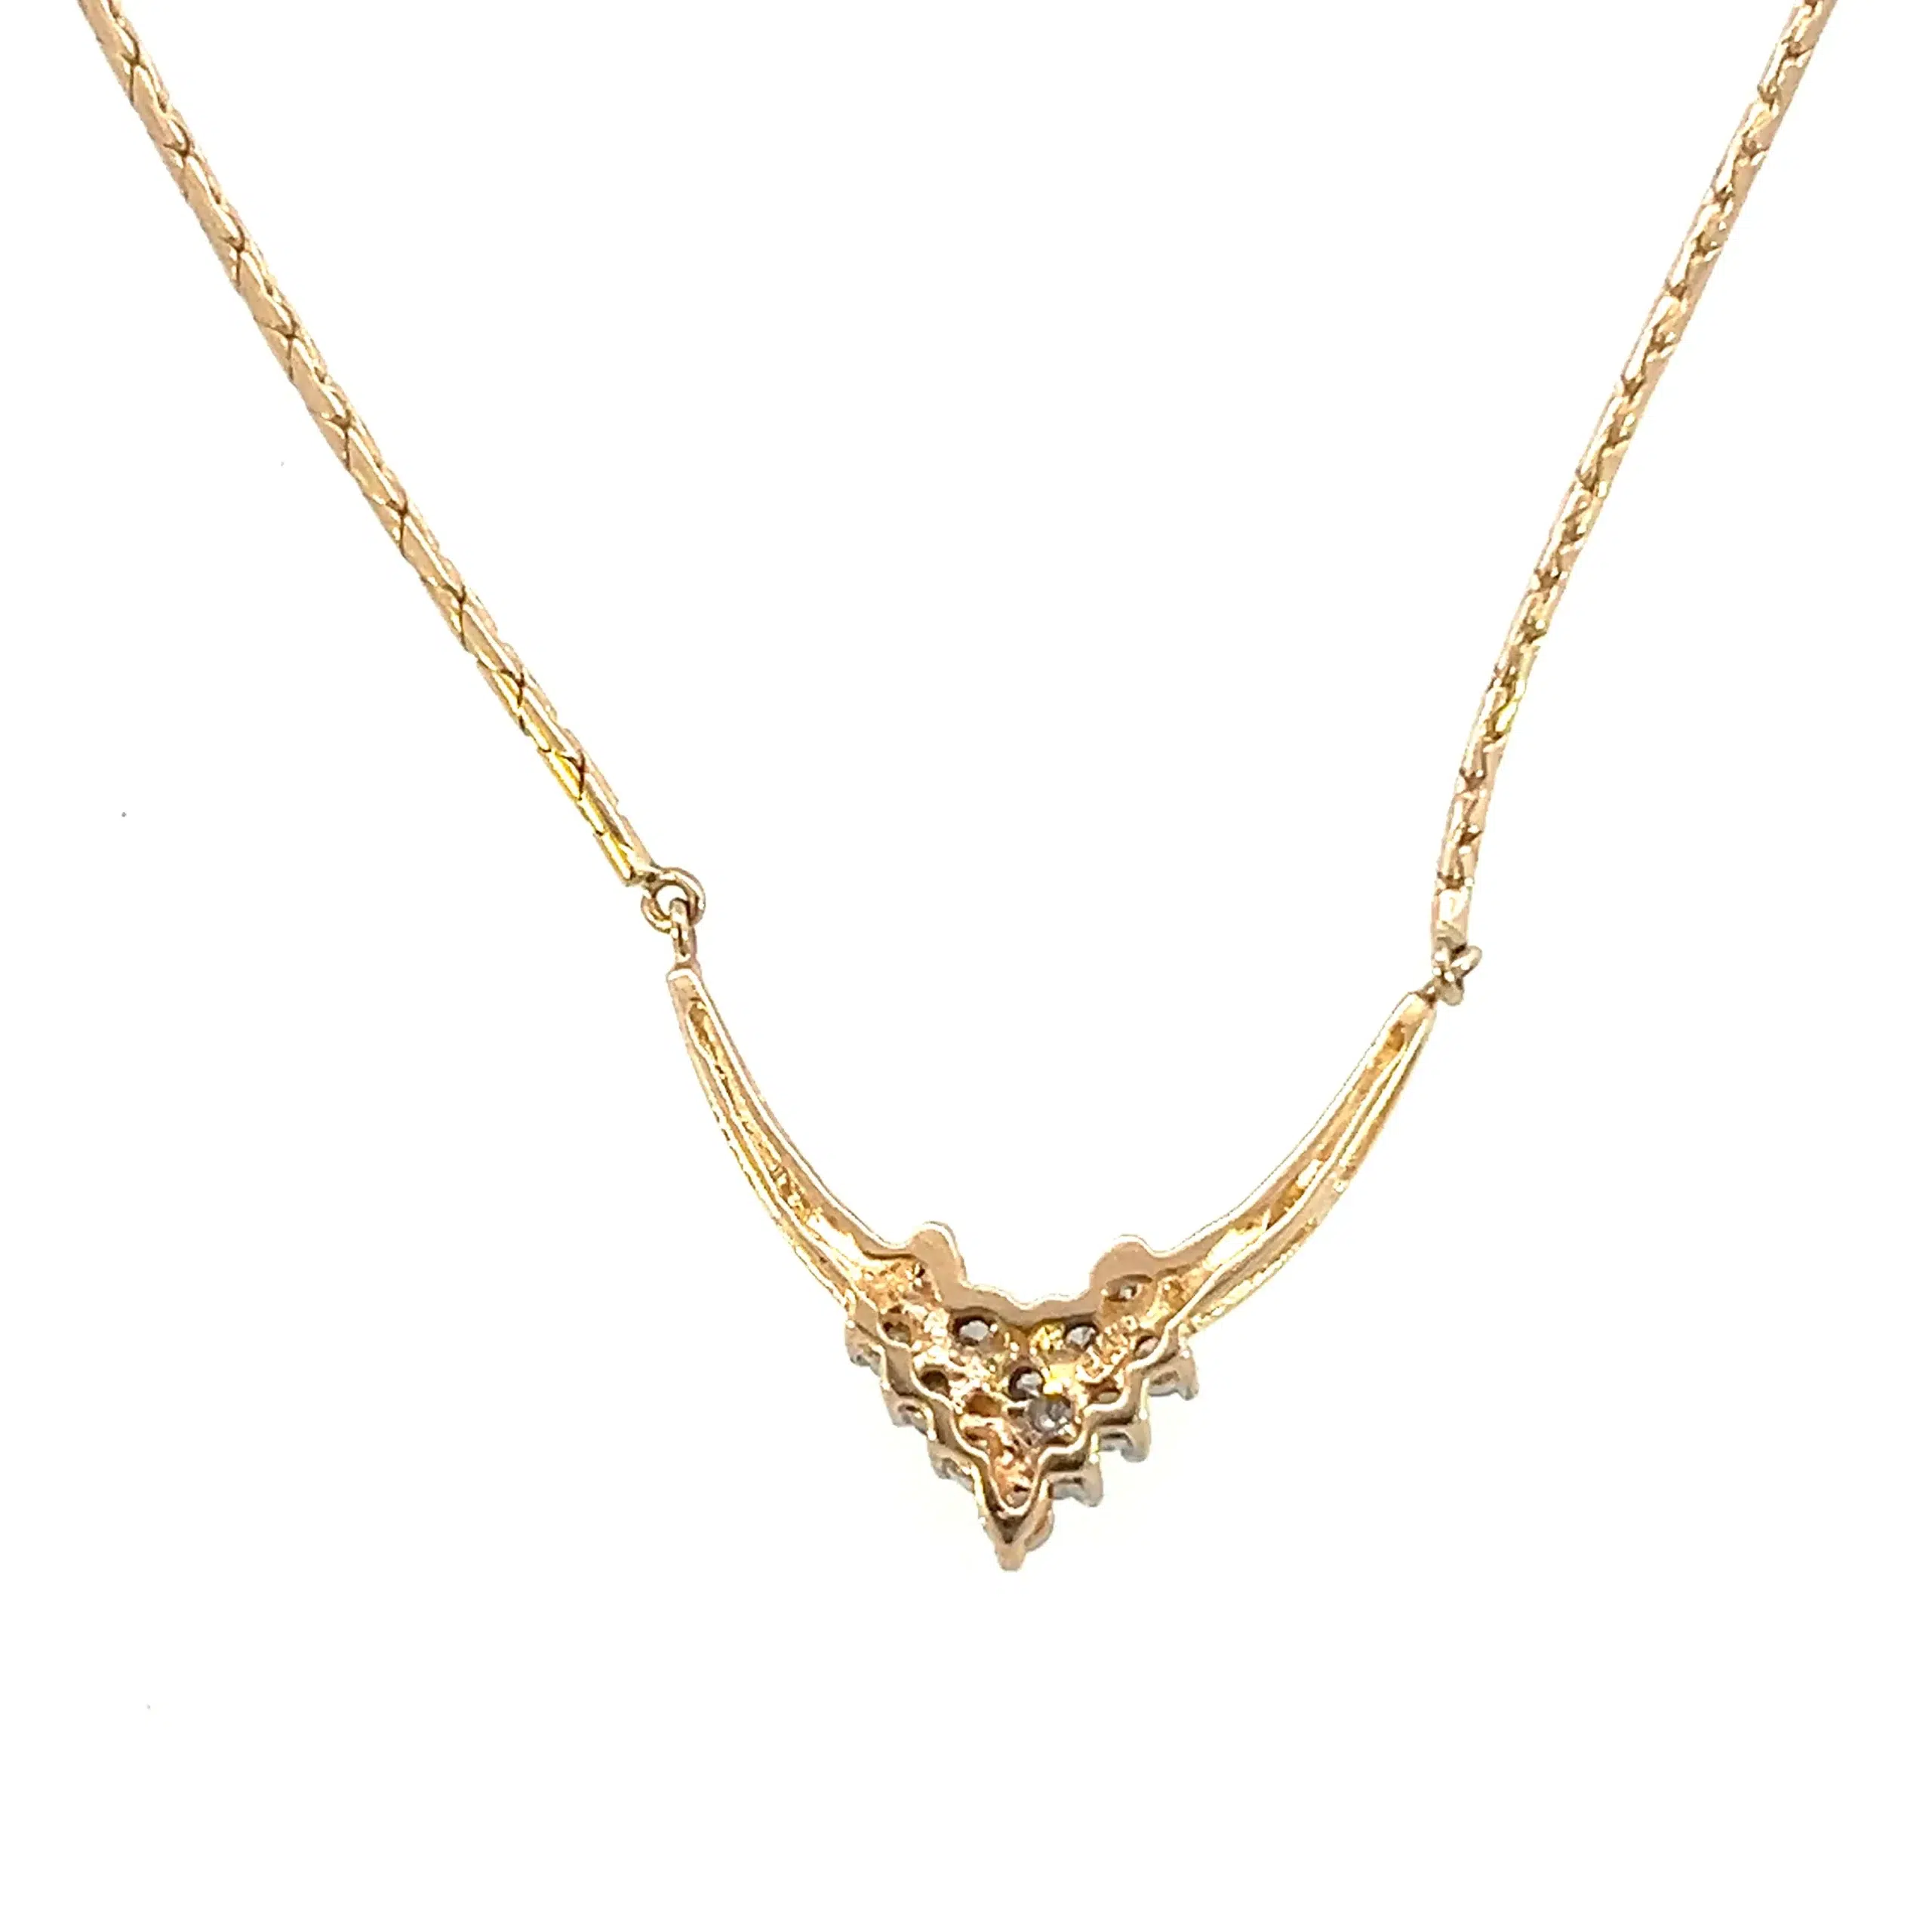 One estate vintage diamond chevron necklace crafted from 14 karat yellow gold and featuring 13 round brilliant diamonds weighing 0.45 carat total weight in a cluster on a pointed chevron pendant. The fixed pendant is attached to a snake link chain. the necklace has a total length of 16" with a lobster claw push pin clasp.